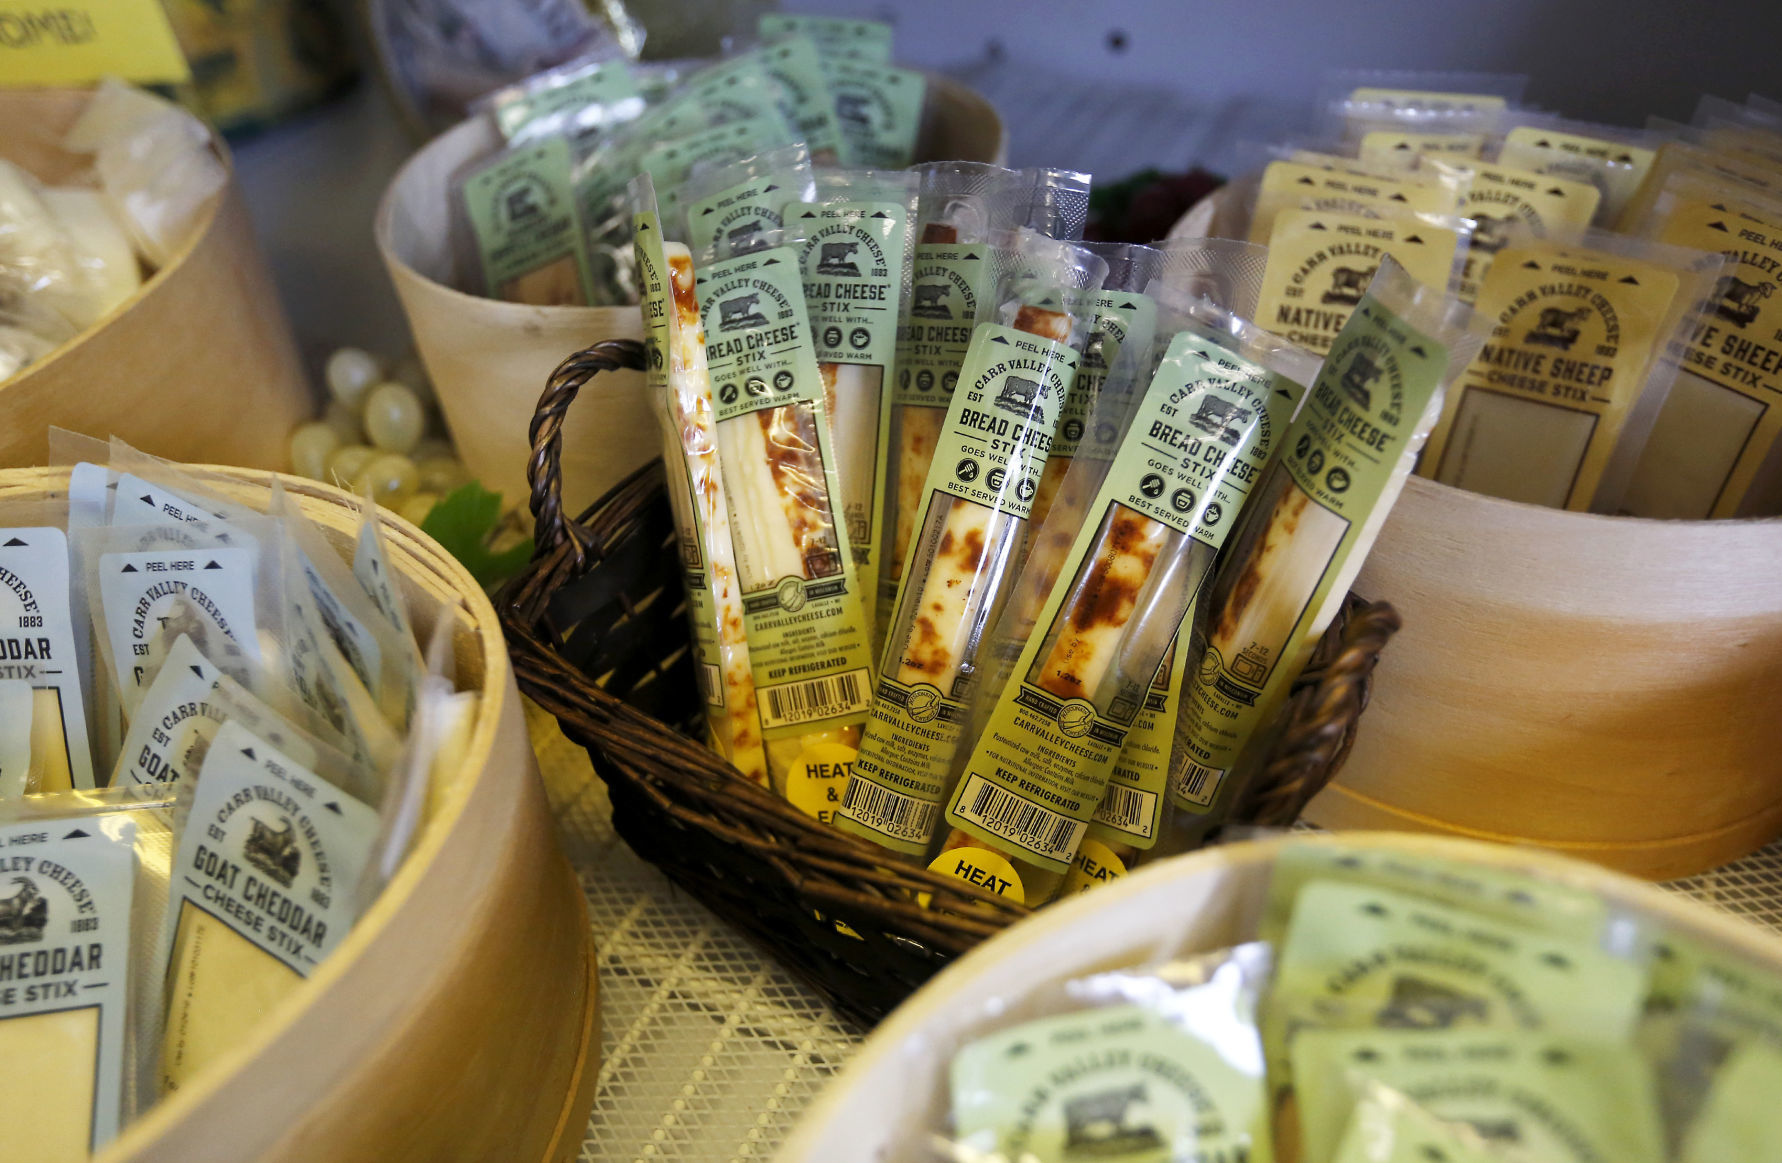 The Carr Valley Cheese Company sells different kinds of cheese products at their location in Fennimore, Wis.    PHOTO CREDIT: EILEEN MESLAR